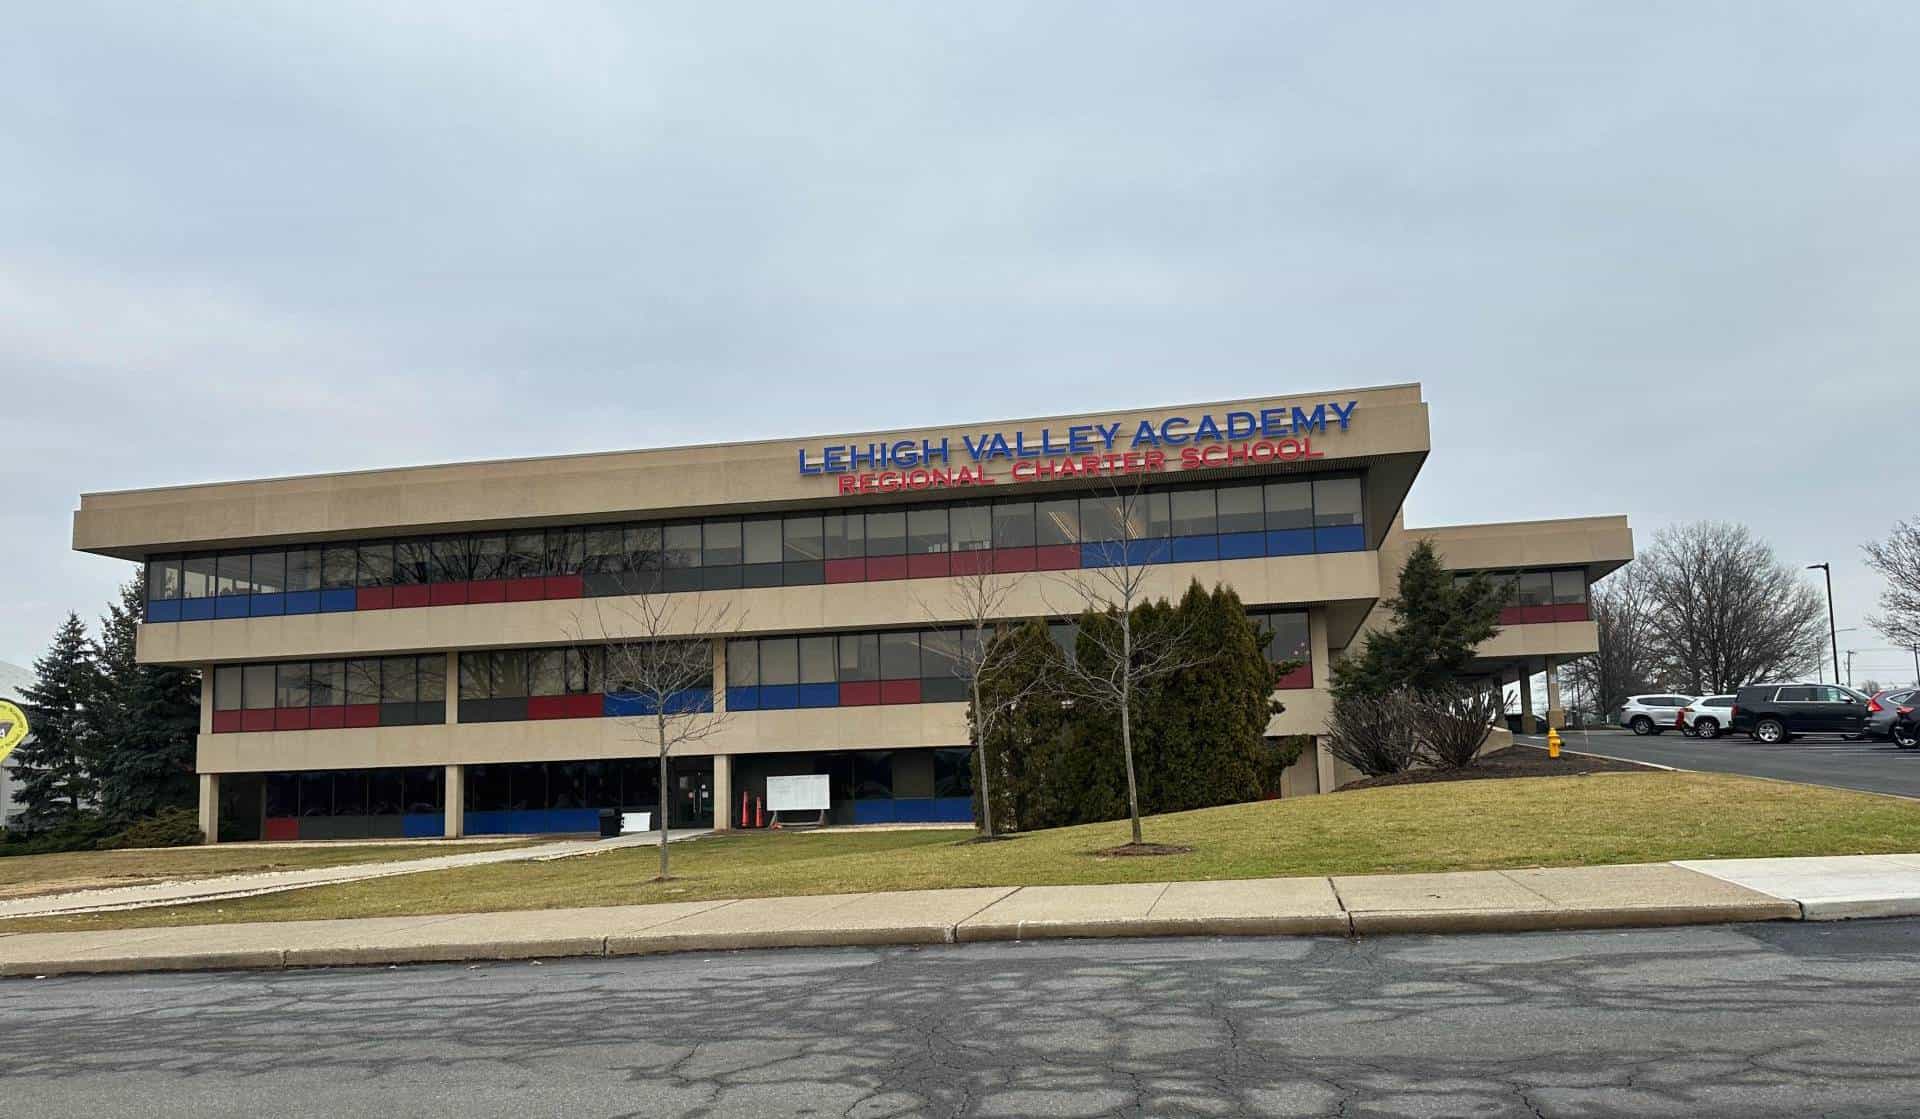 Lawn care services at Lehigh Valley Academy in Bethlehem, PA